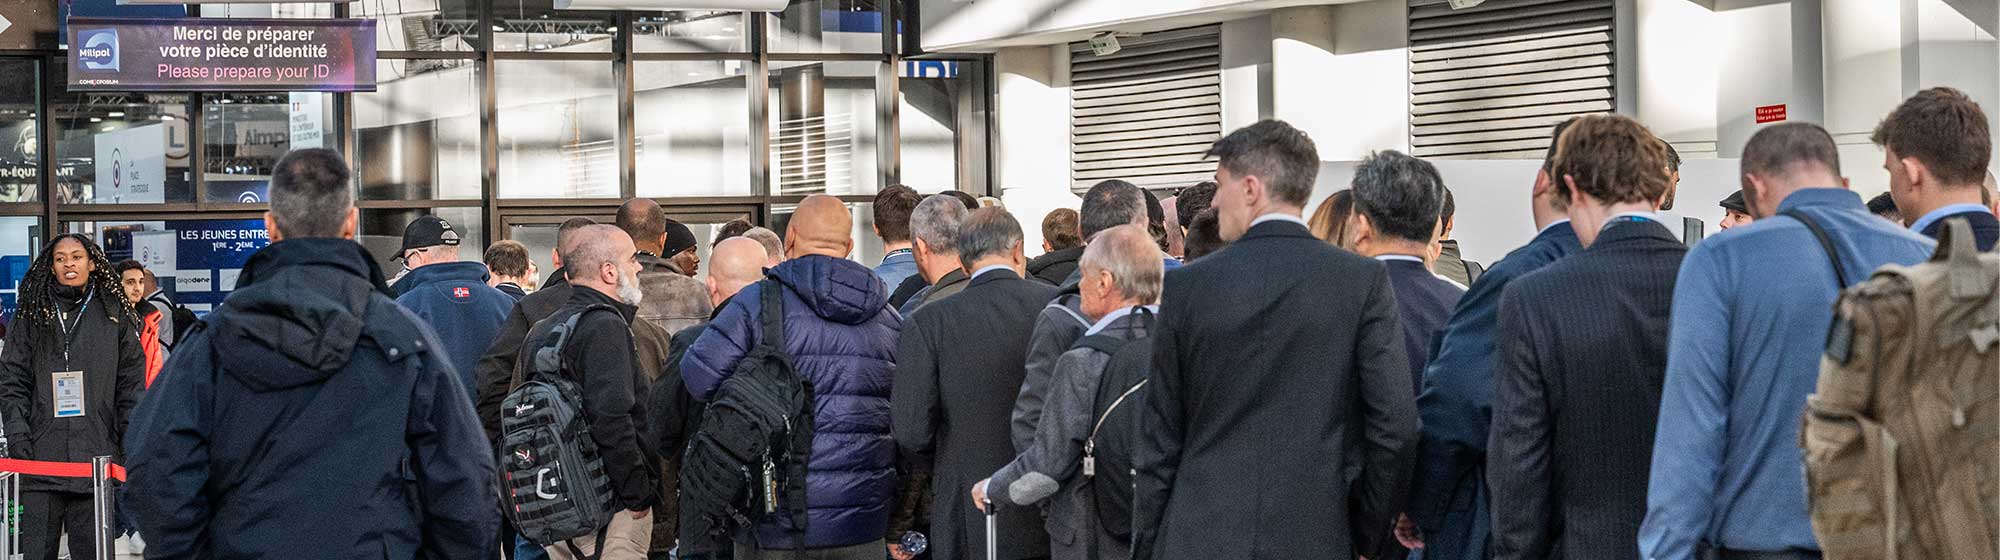 A group of people waiting in line at Milipol Paris's entrance under a sign that reads “Bienvenue Welcome” and instructs attendees to present their badges.  Attendees are lined up, waiting to enter.